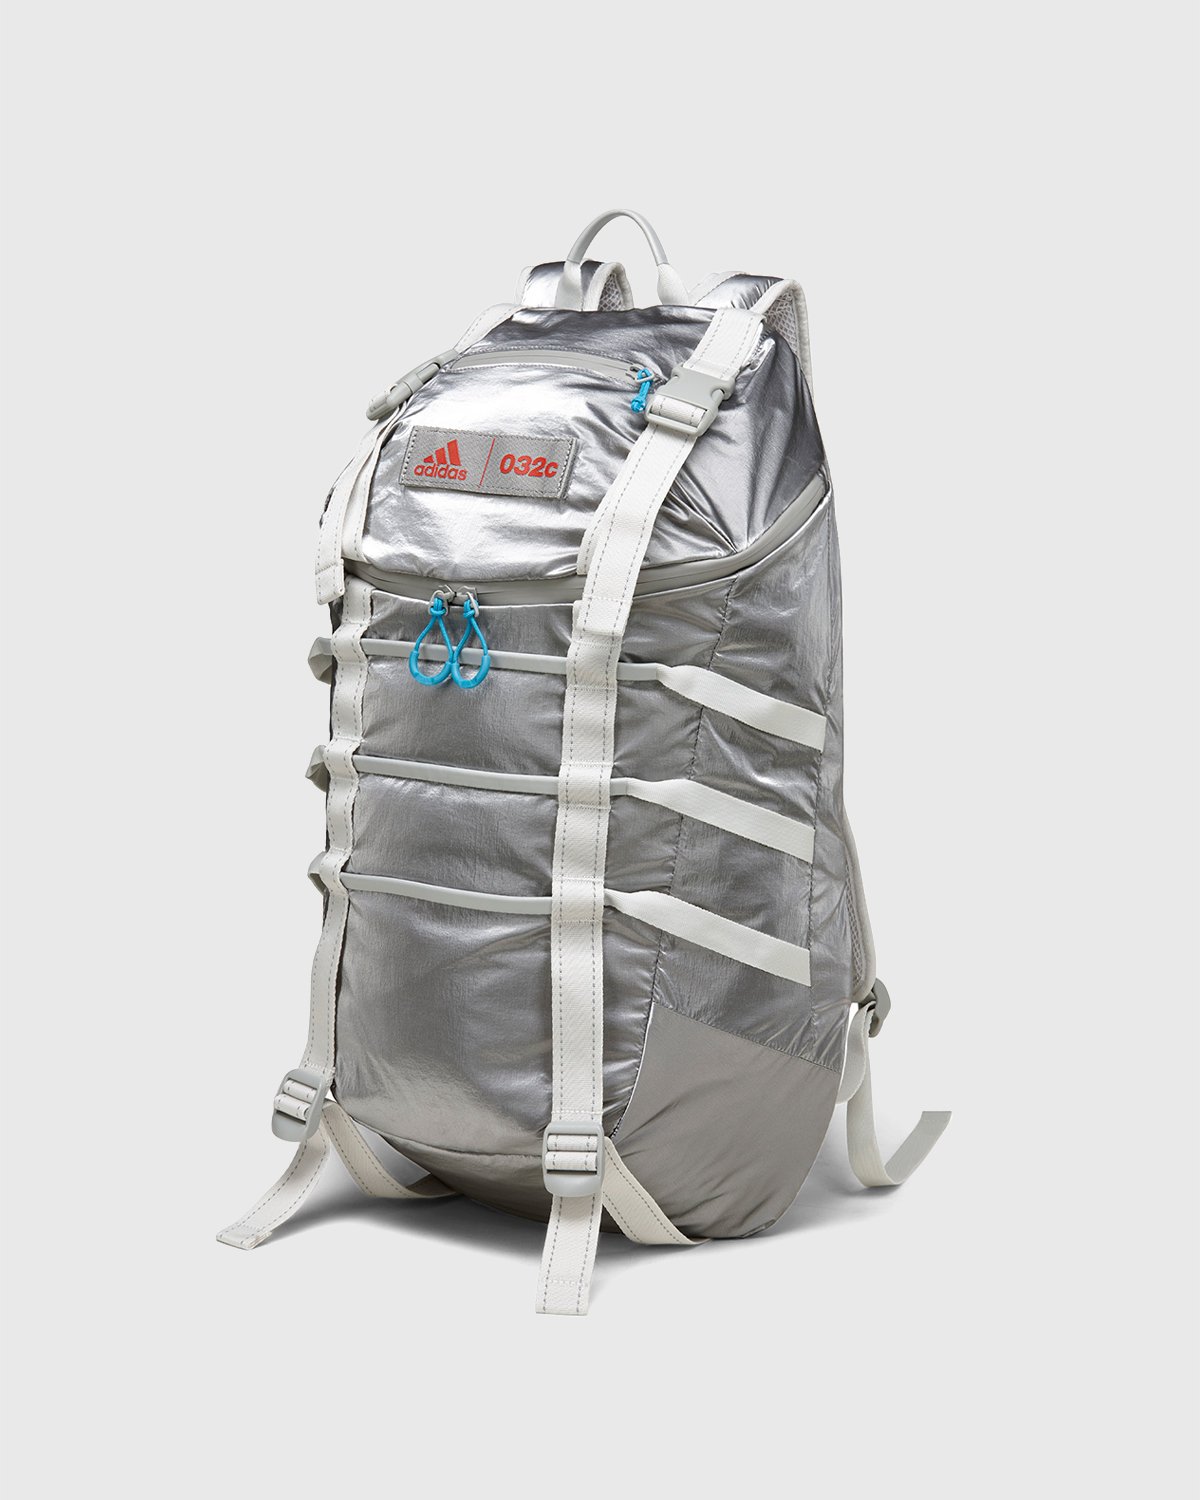 Adidas x 032c - Backpack Greone - Accessories - White - Image 2